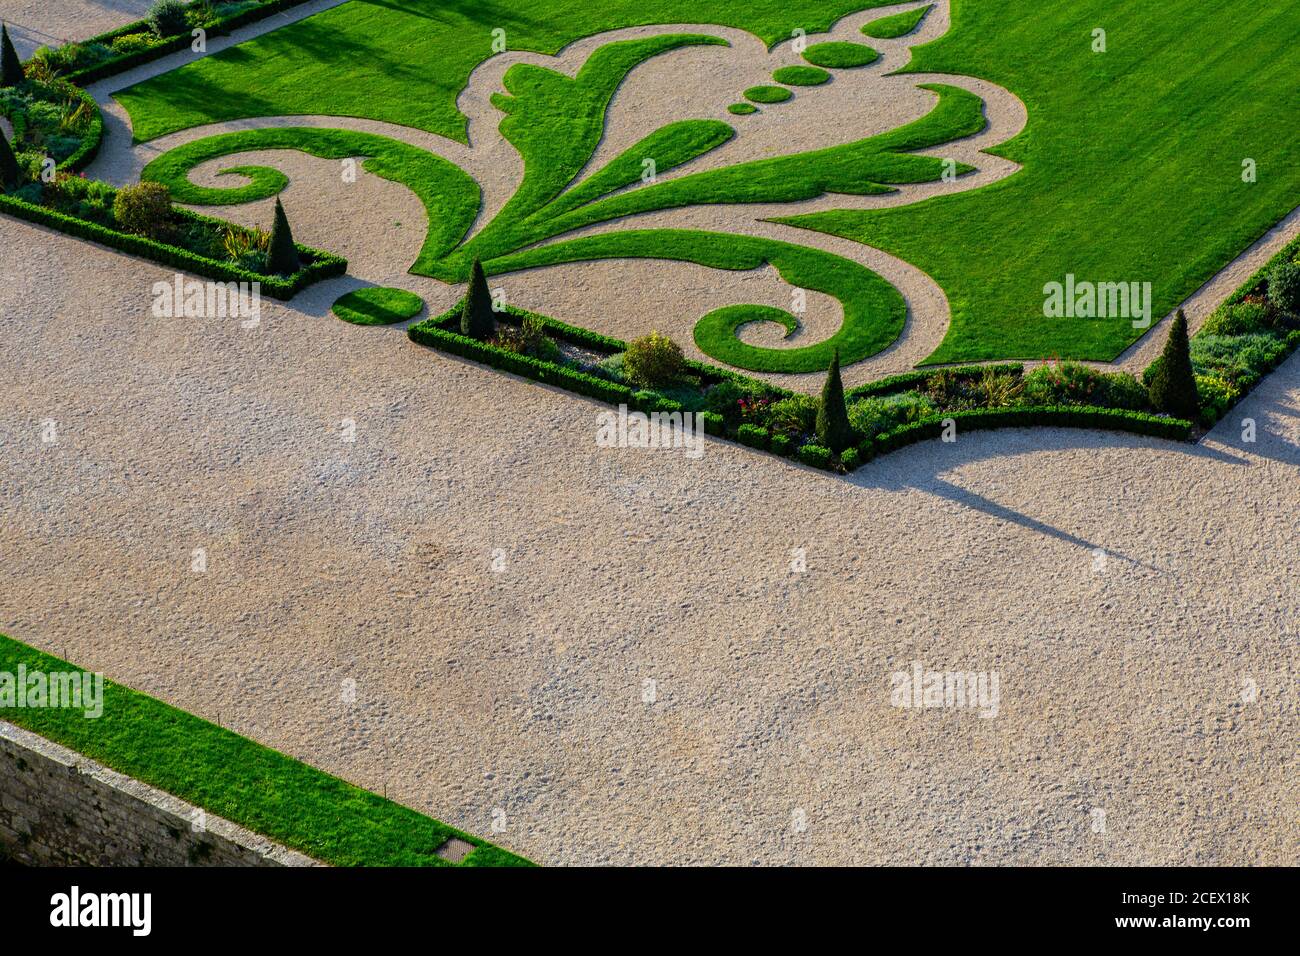 The sunset view of the garden in Chateau de Chambord, Loire Valley, France. Stock Photo